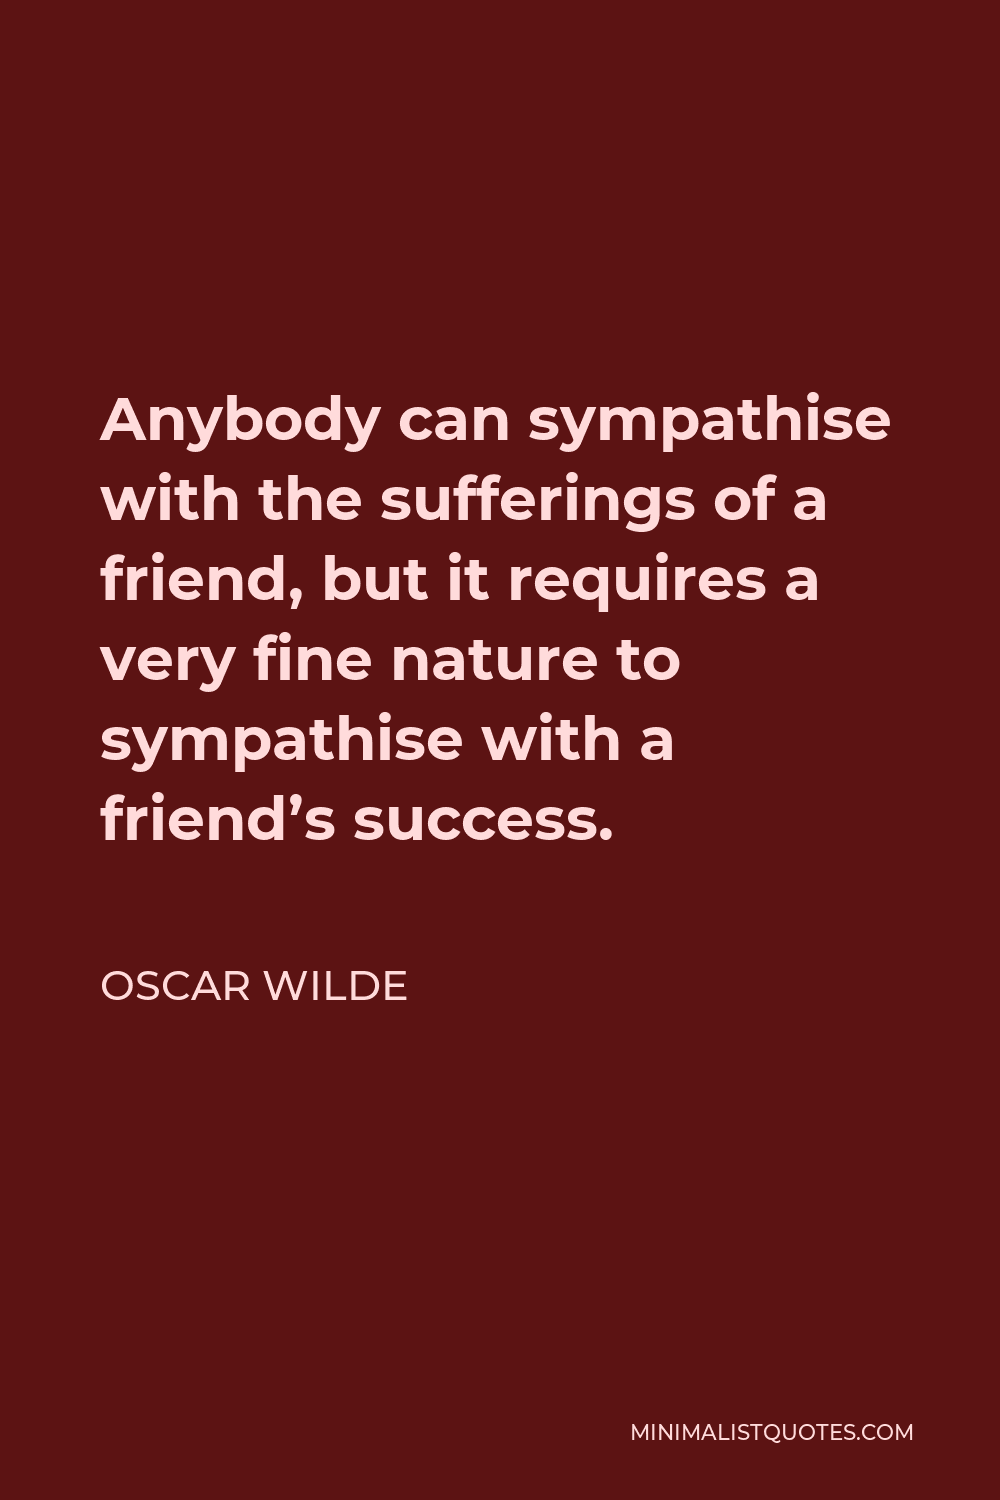 Oscar Wilde Quote - Anybody can sympathise with the sufferings of a friend, but it requires a very fine nature to sympathise with a friend’s success.